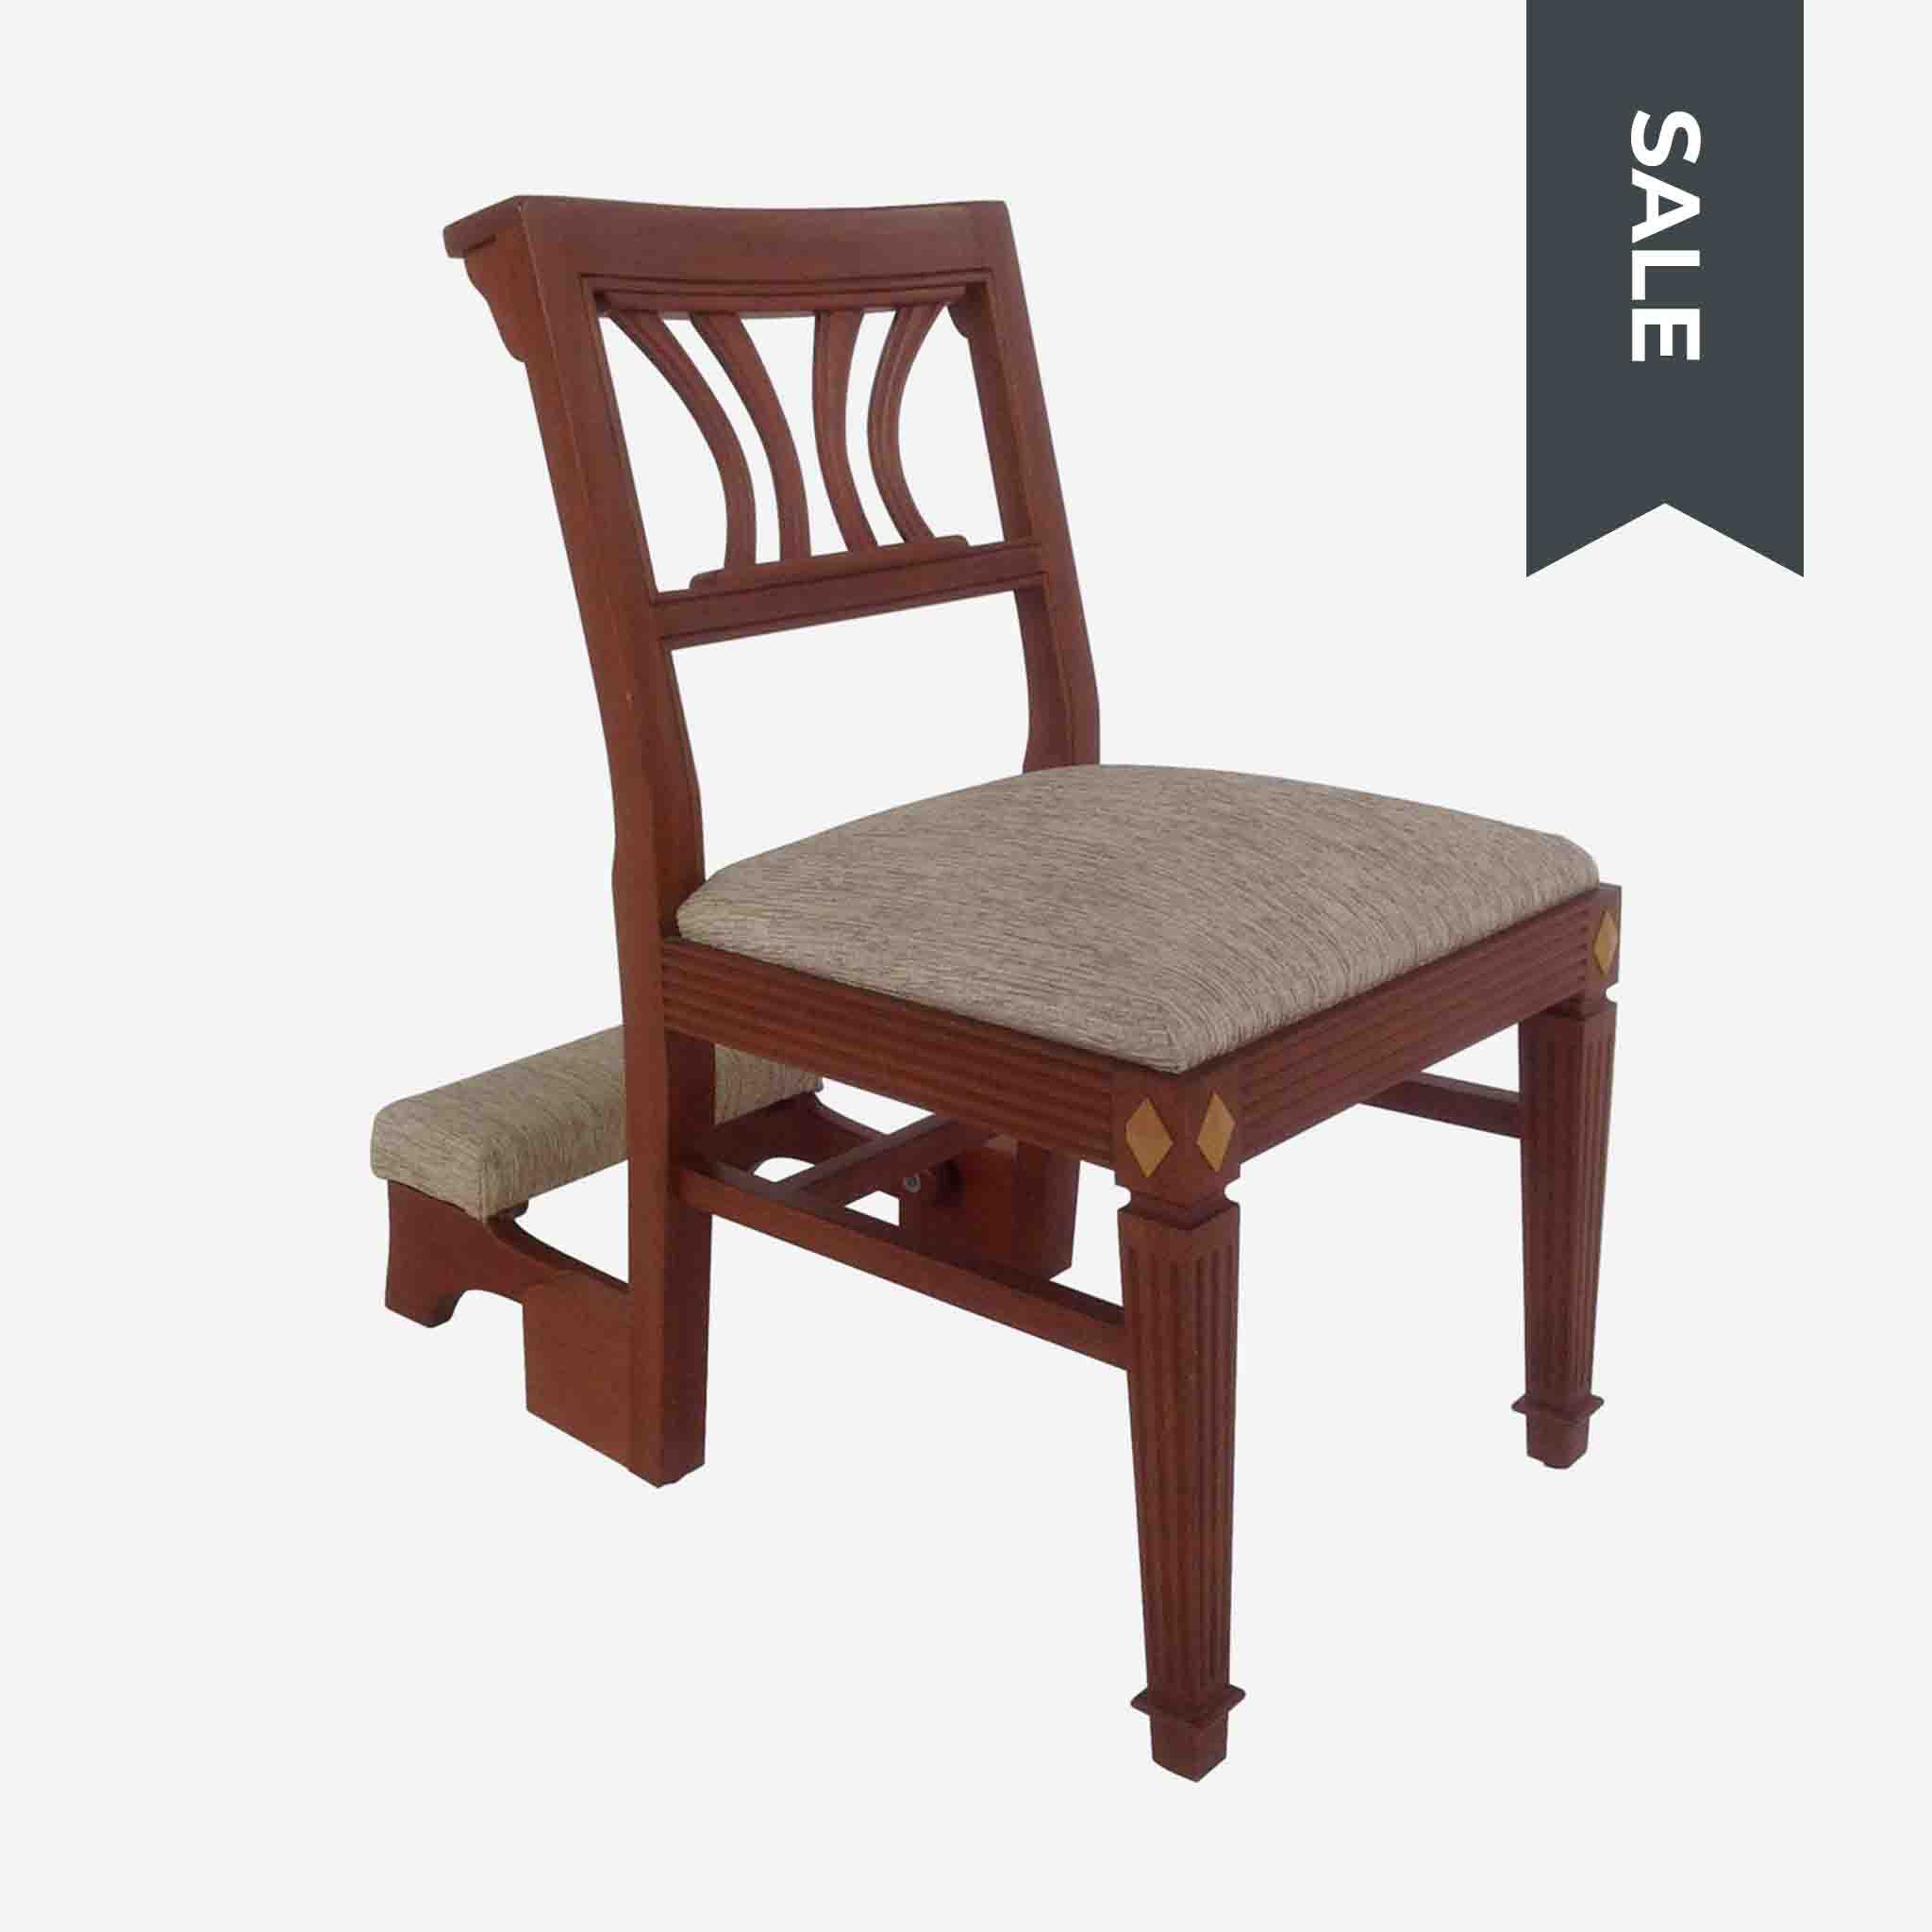 Chair Kneeler - Focolare Carpentry - Furniture Maker Philippines - - High Quality, Custom-made Furniture - Manila, Philippines. Custom-made Chairs, Tables.